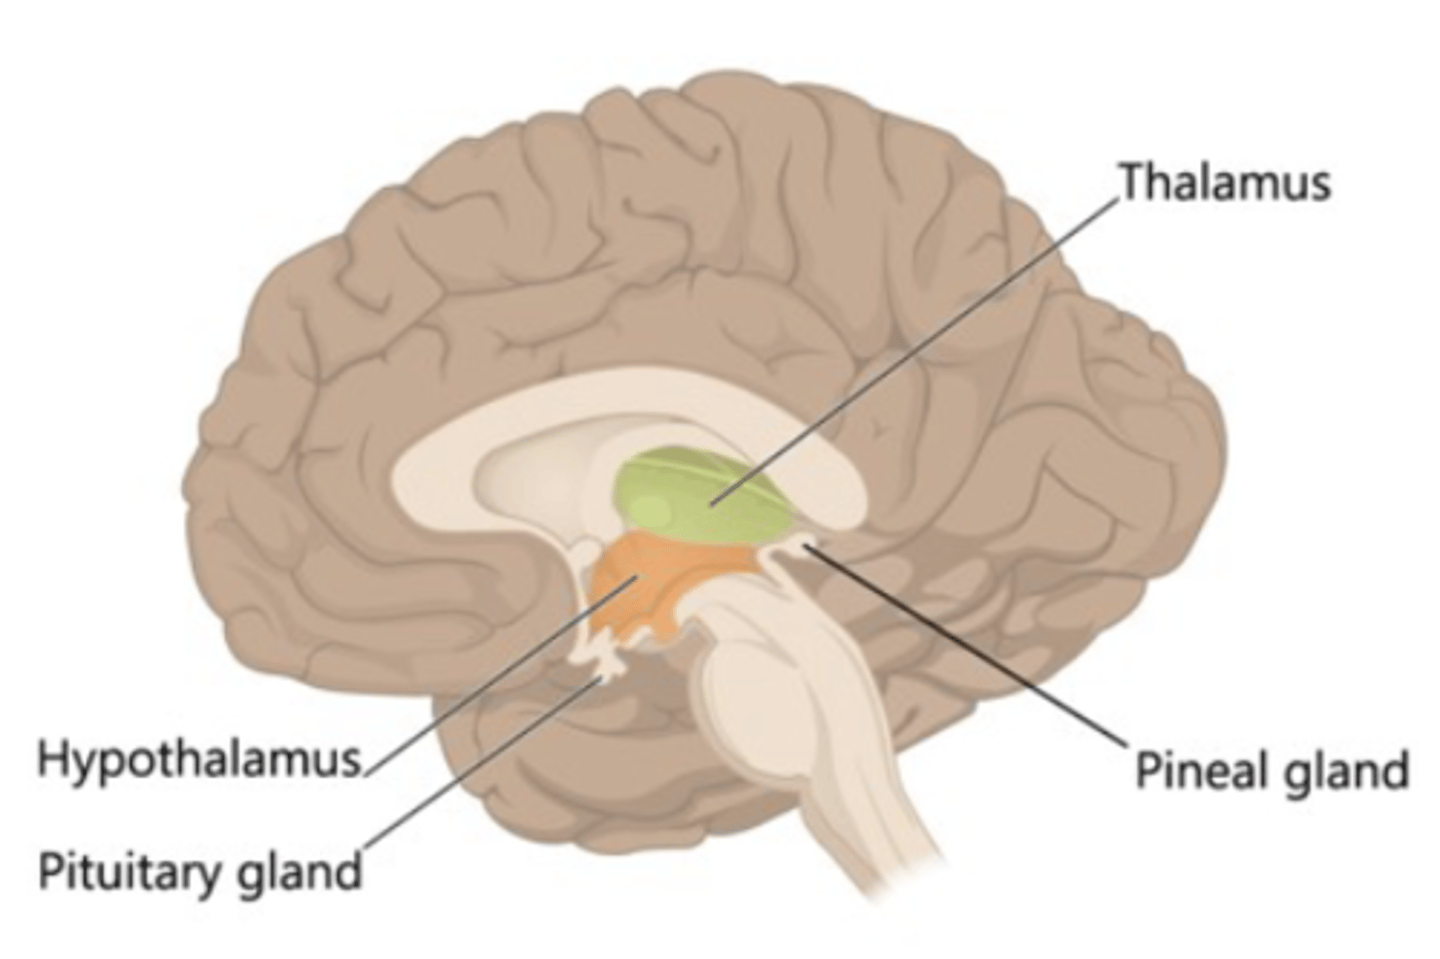 <p>1. Thalamus: Major sensory relay Centre. Receives input from sensory nerves and projects to the primary sensory areas of the cerebral cortex. All sensory information is relayed through the thalamus except olfaction. Also participates in motor and memory circuits.</p><p>2. Hypothalamus: Critical homeostatic functions. Regulates autonomic and endocrine systems.</p>